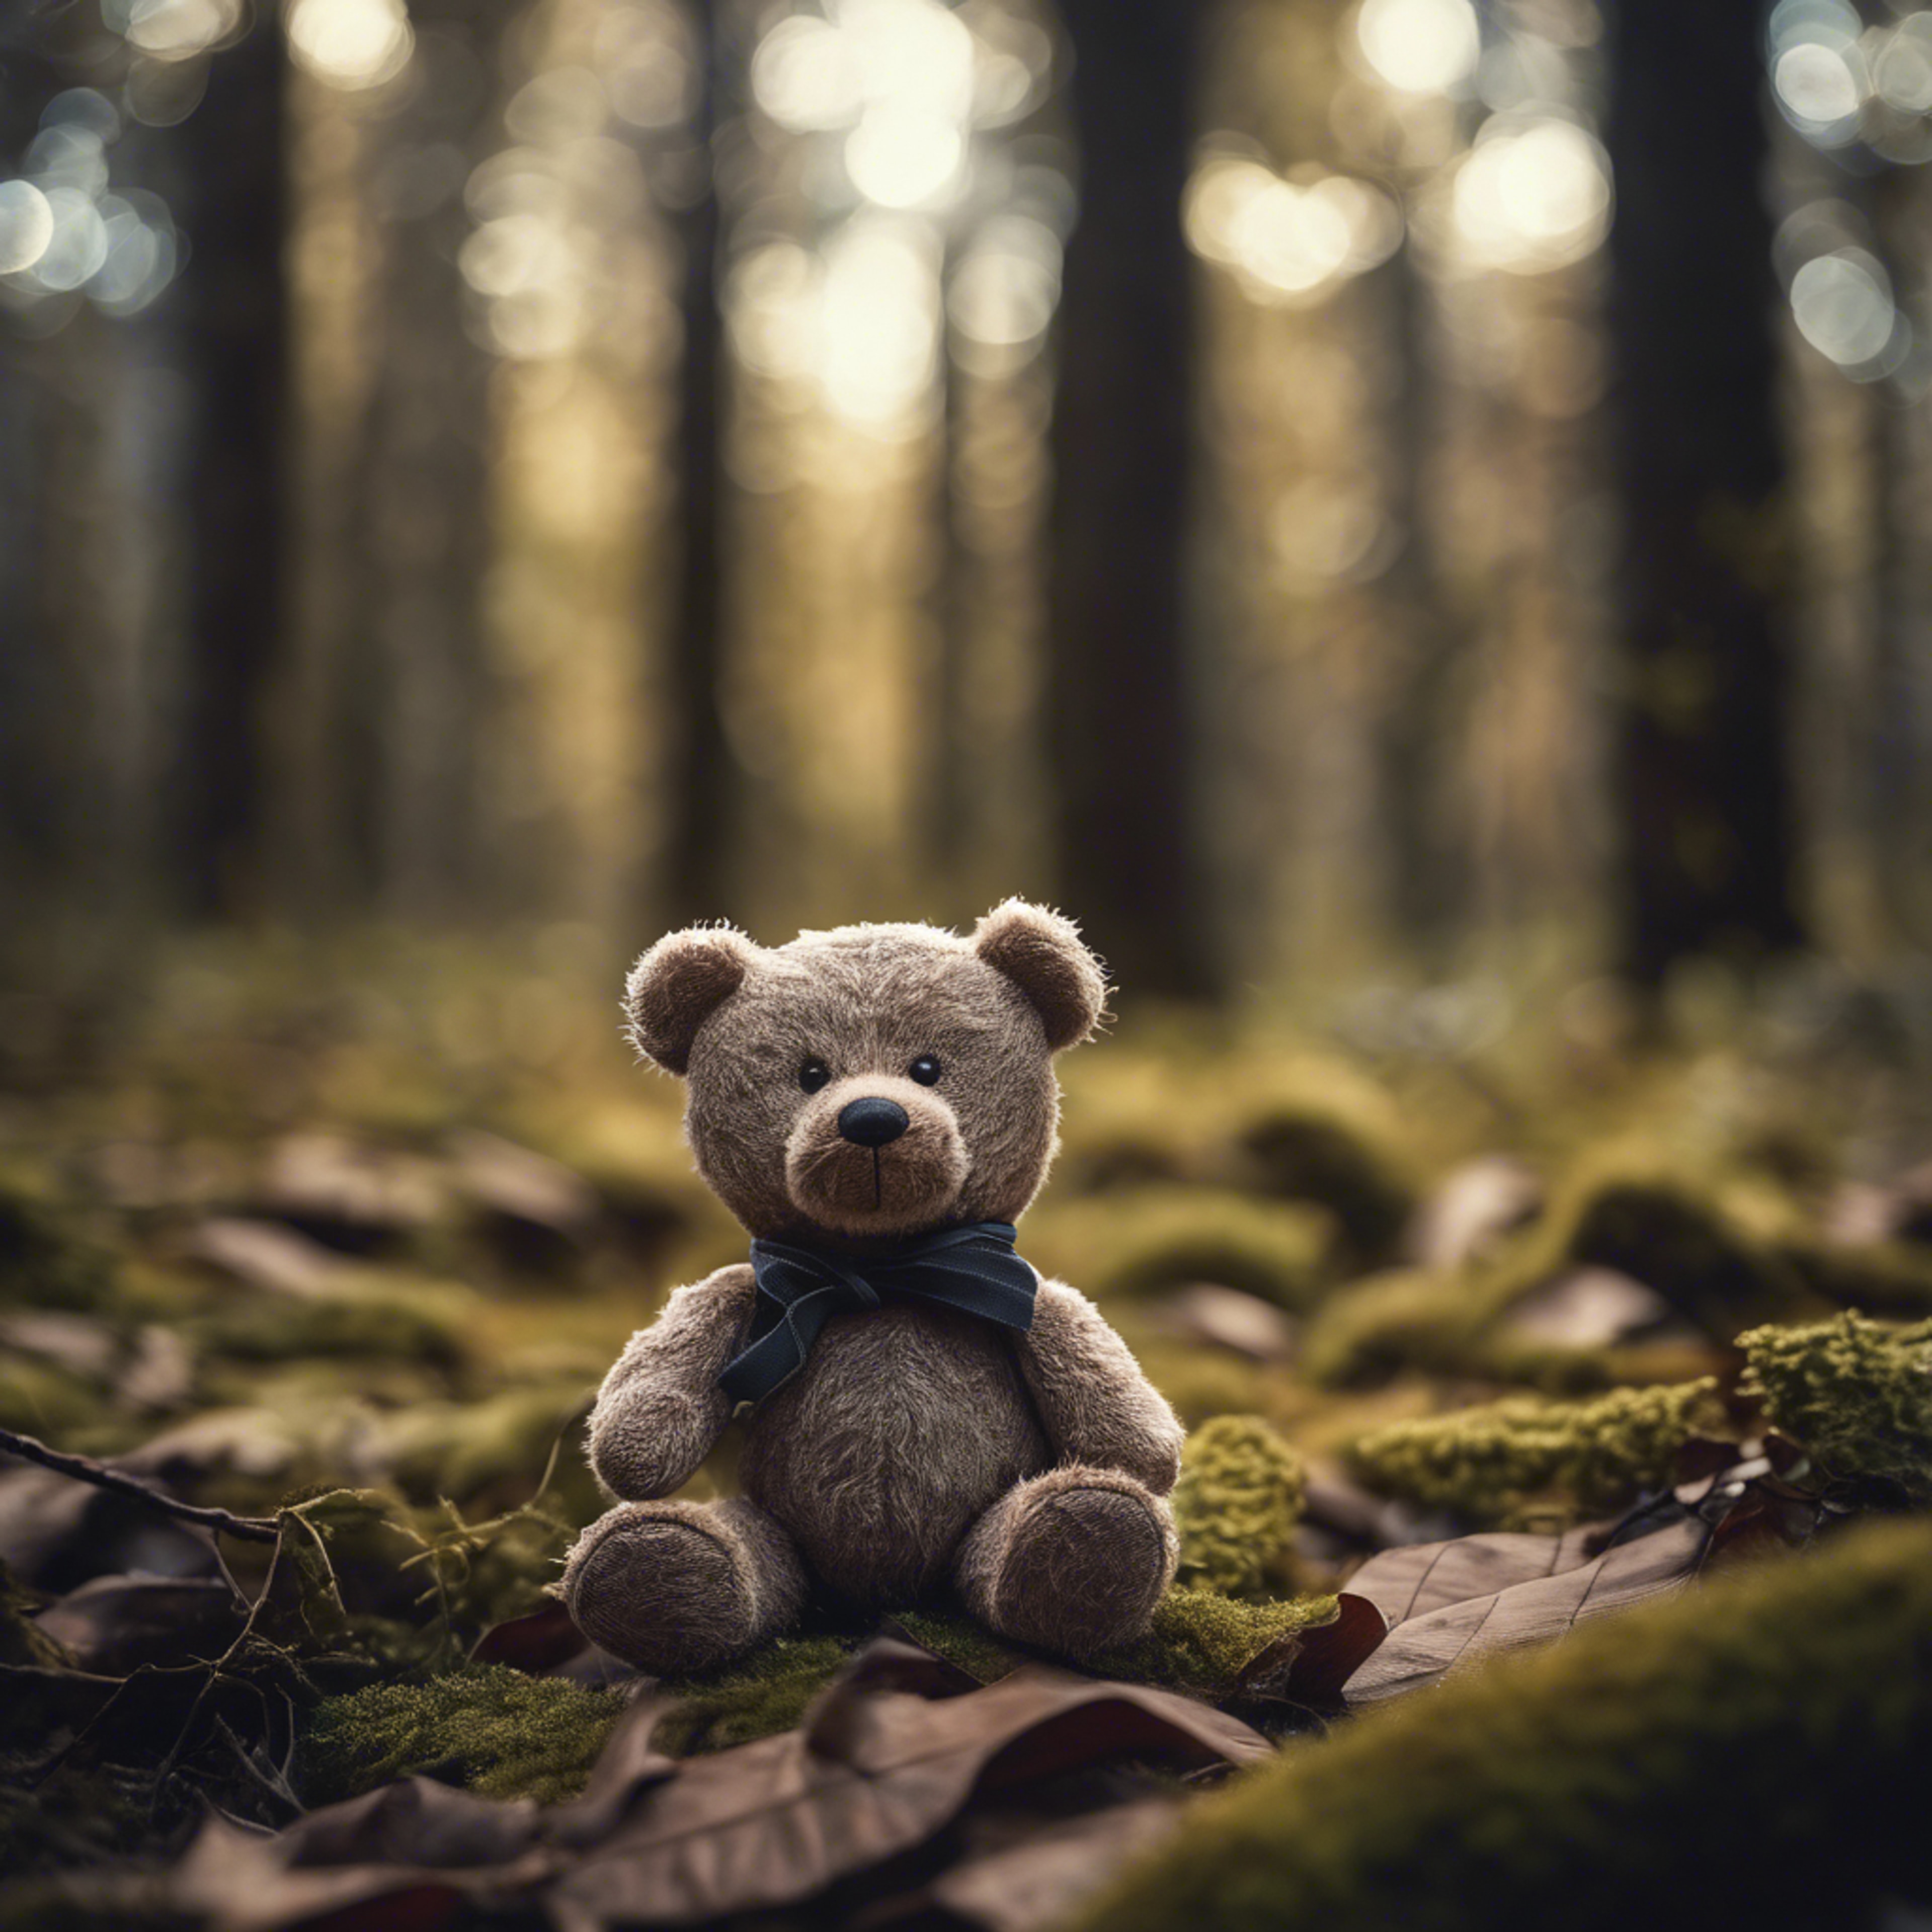 A teddy bear lost and alone in a dark forest. Behang[4d225efade314682baea]